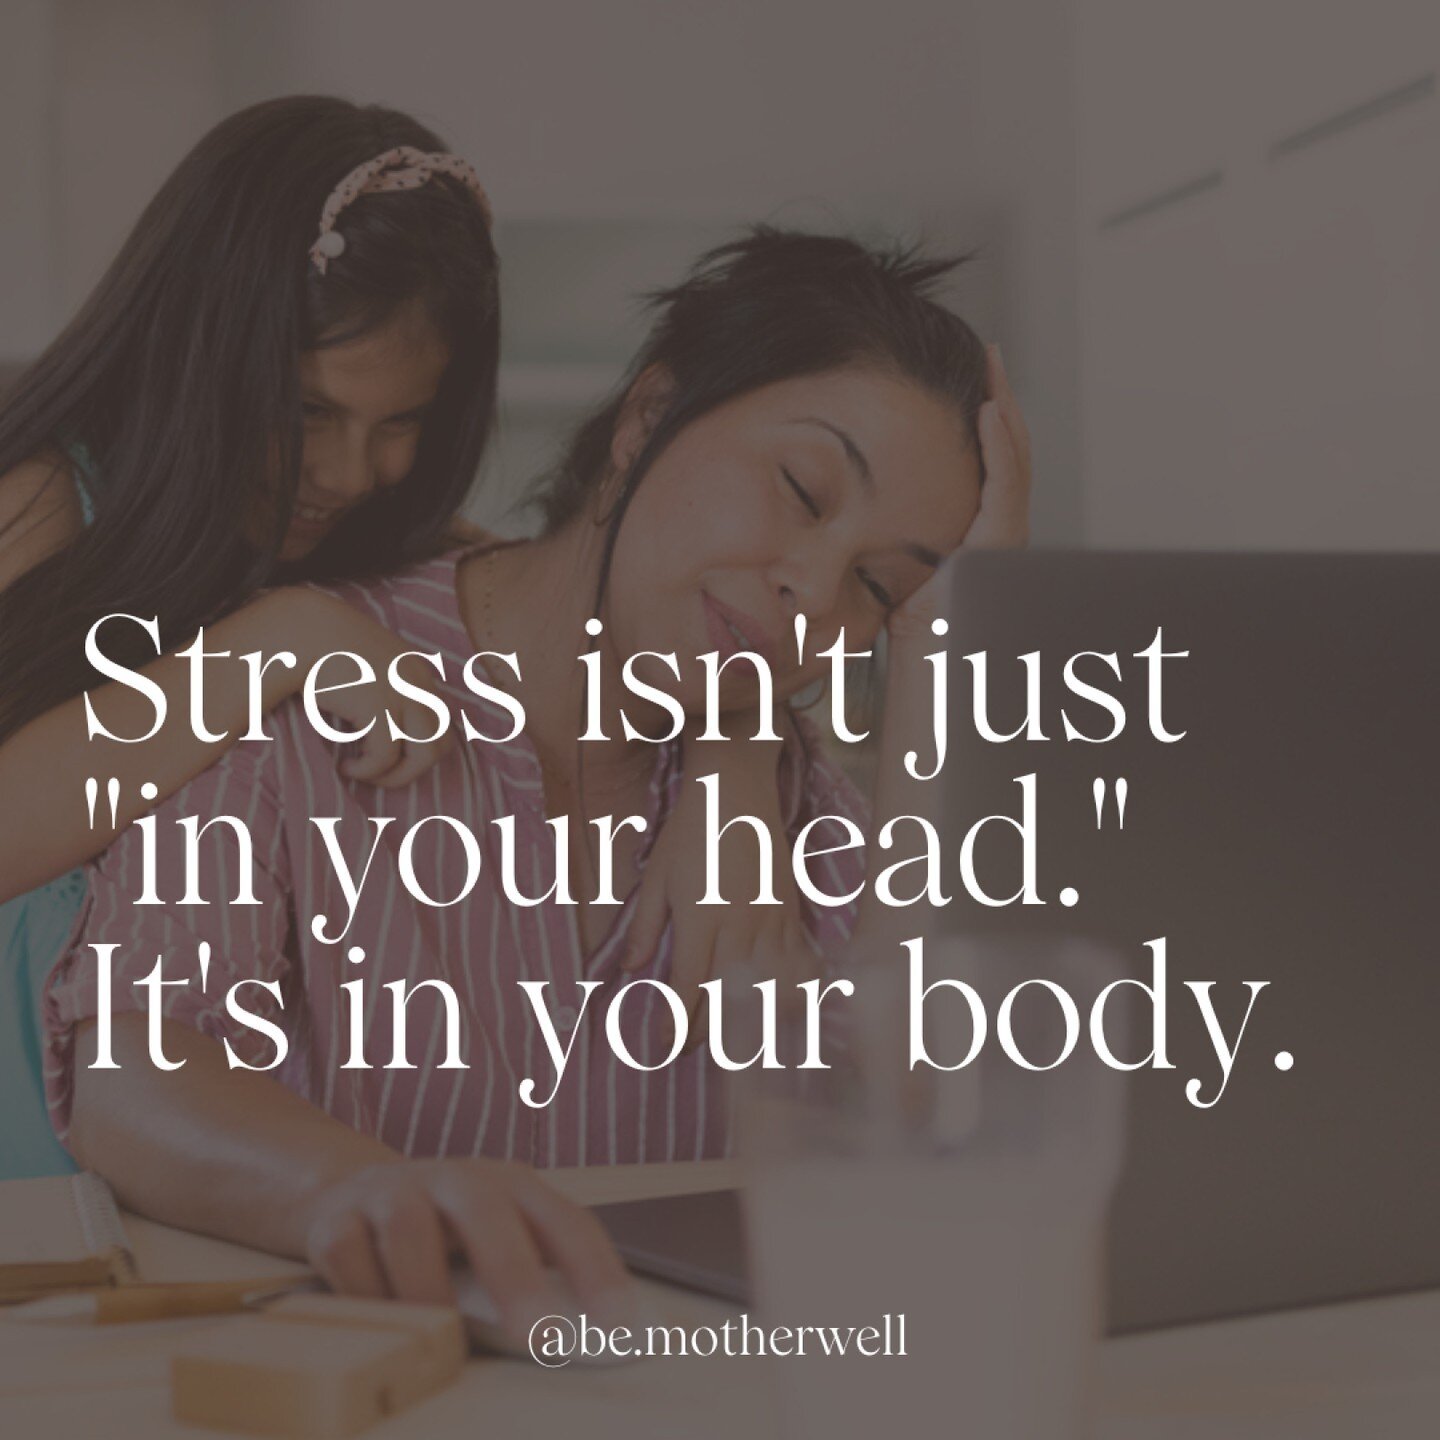 Stress isn't just &quot;in your head.&quot; It's in your body.

And the opposite is true too. The stress of the world and in your life can cause changes in your body:

You burn through more nutrients when you're &quot;stressed out&quot; (magnesium, a